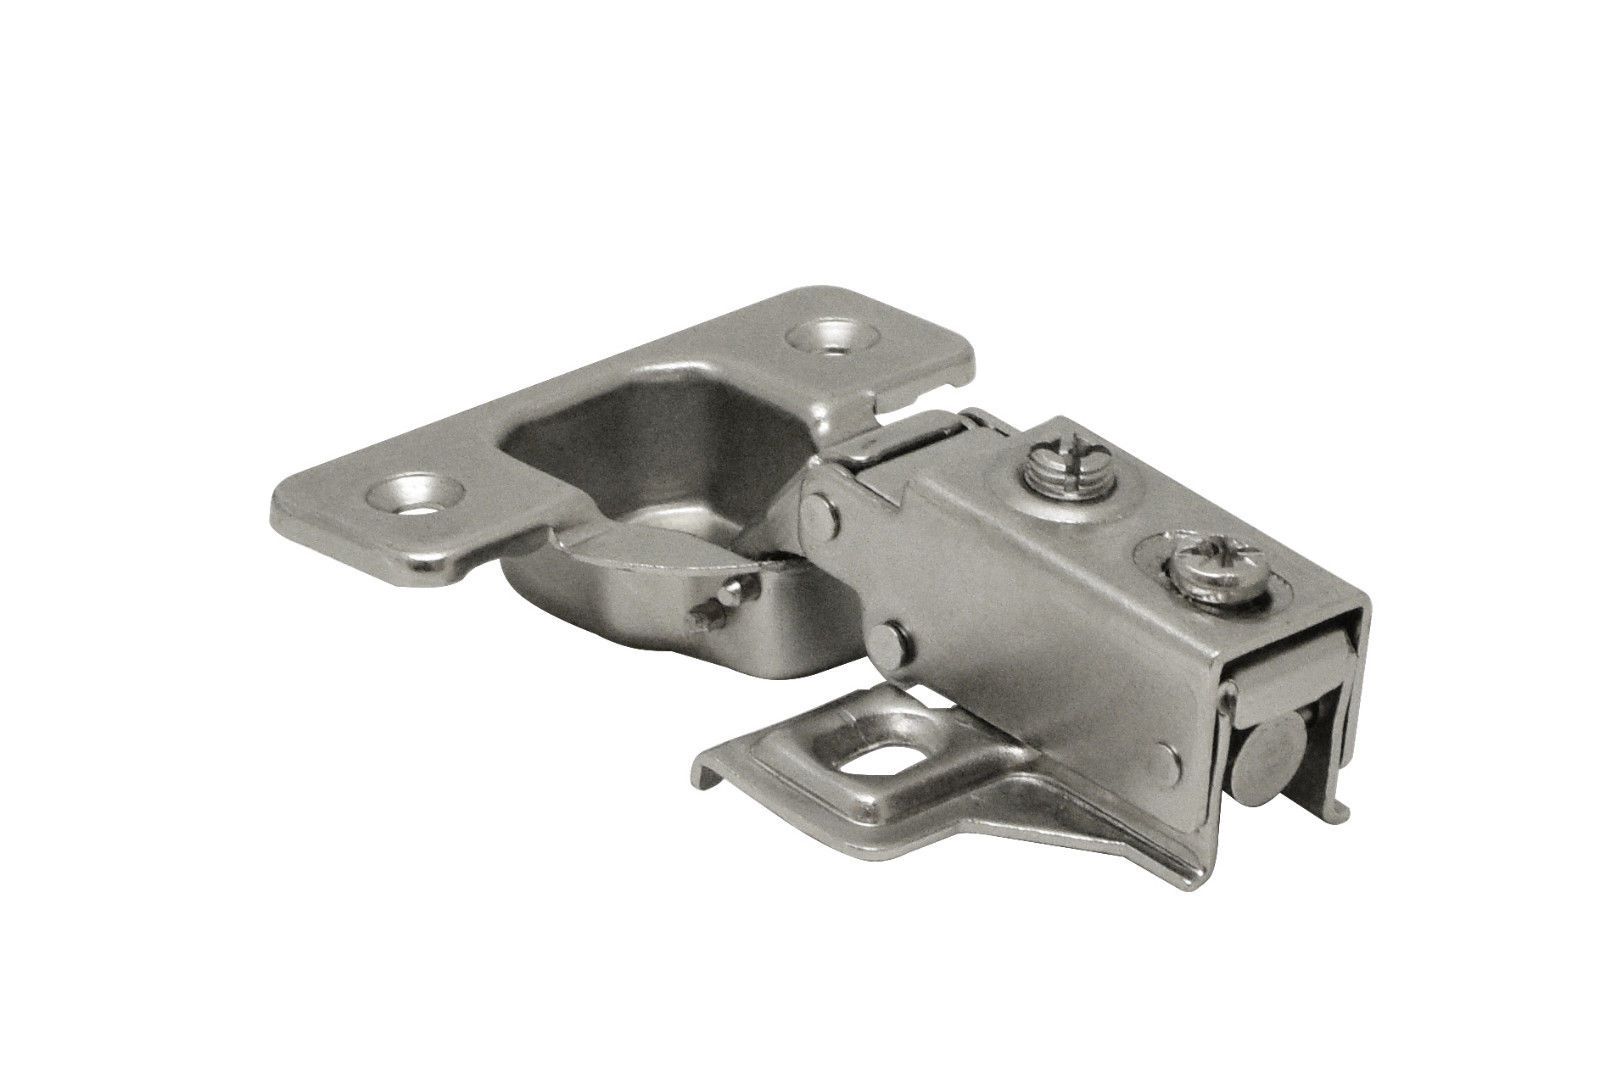 1/2 Half & 3/4 Three Quarters - Cabinet Hinges w Plate Face Frame - Soft Close Piston Compact - amerfithardware